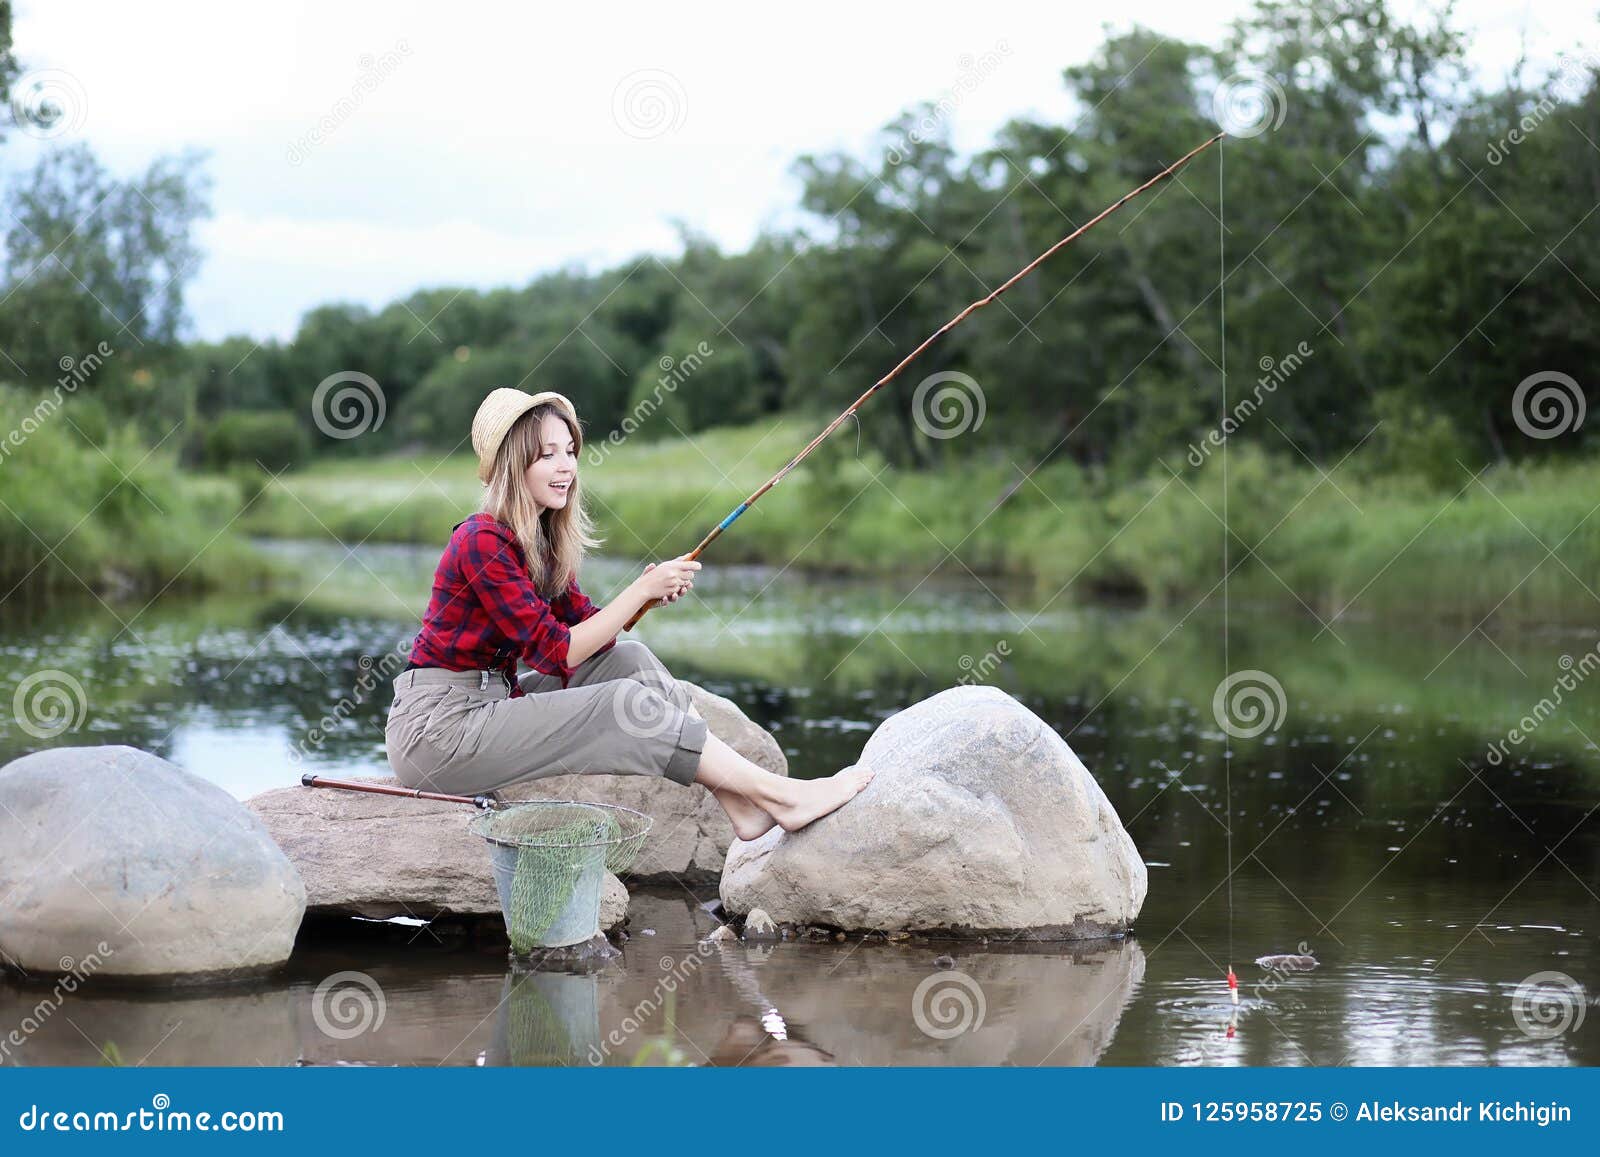 Girl by the River with a Fishing Rod Stock Image - Image of girl, retro:  125958725